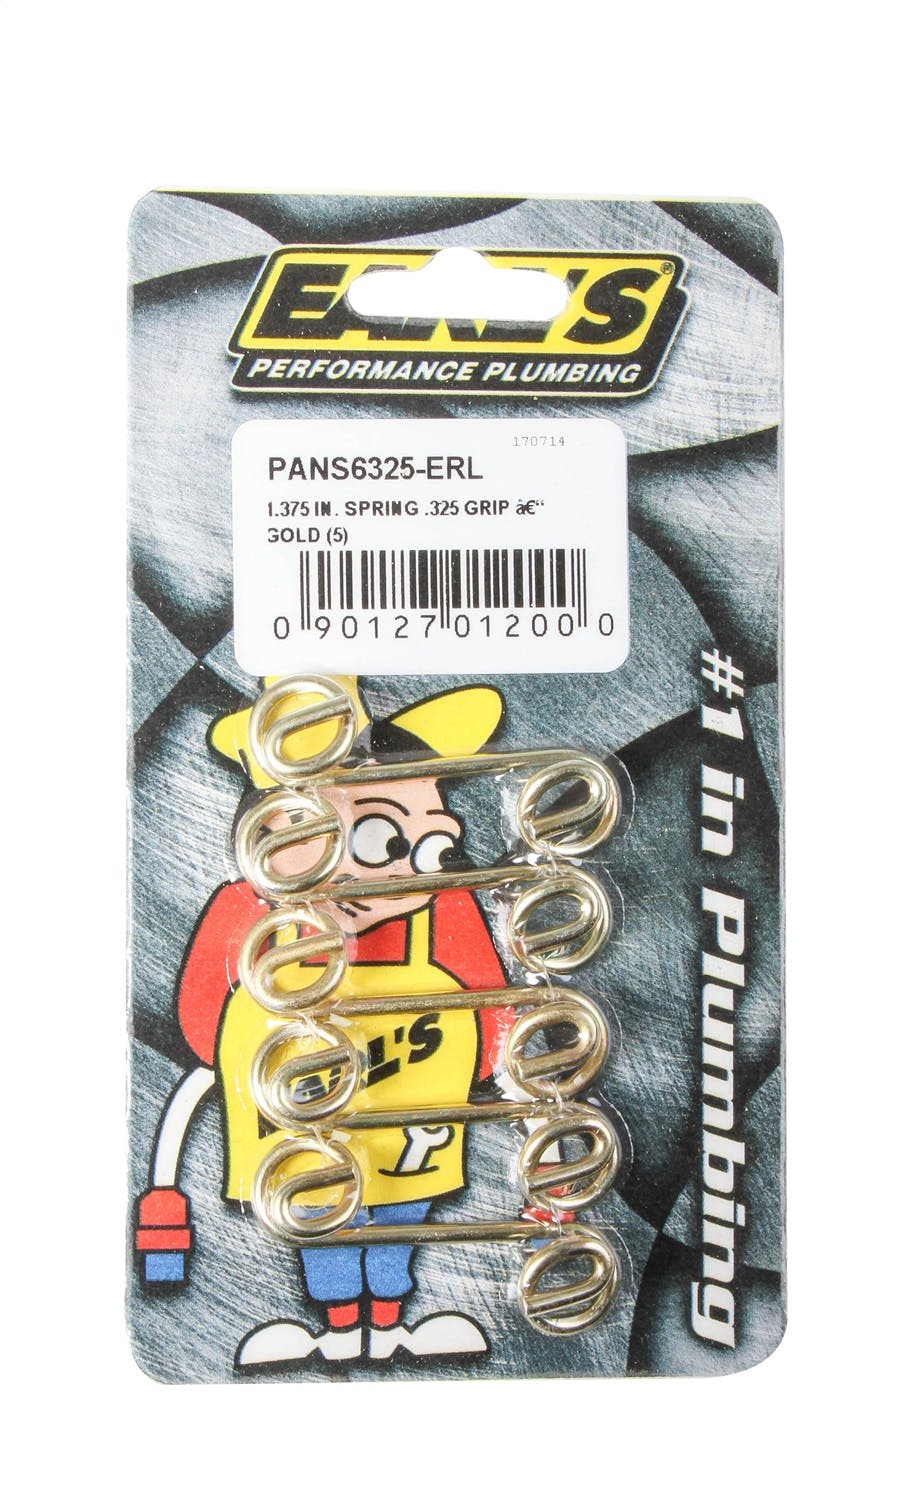 Earl's Performance Plumbing PANS6325-ERL 1.375 IN. SPRING .325 GRIP - GOLD (5)